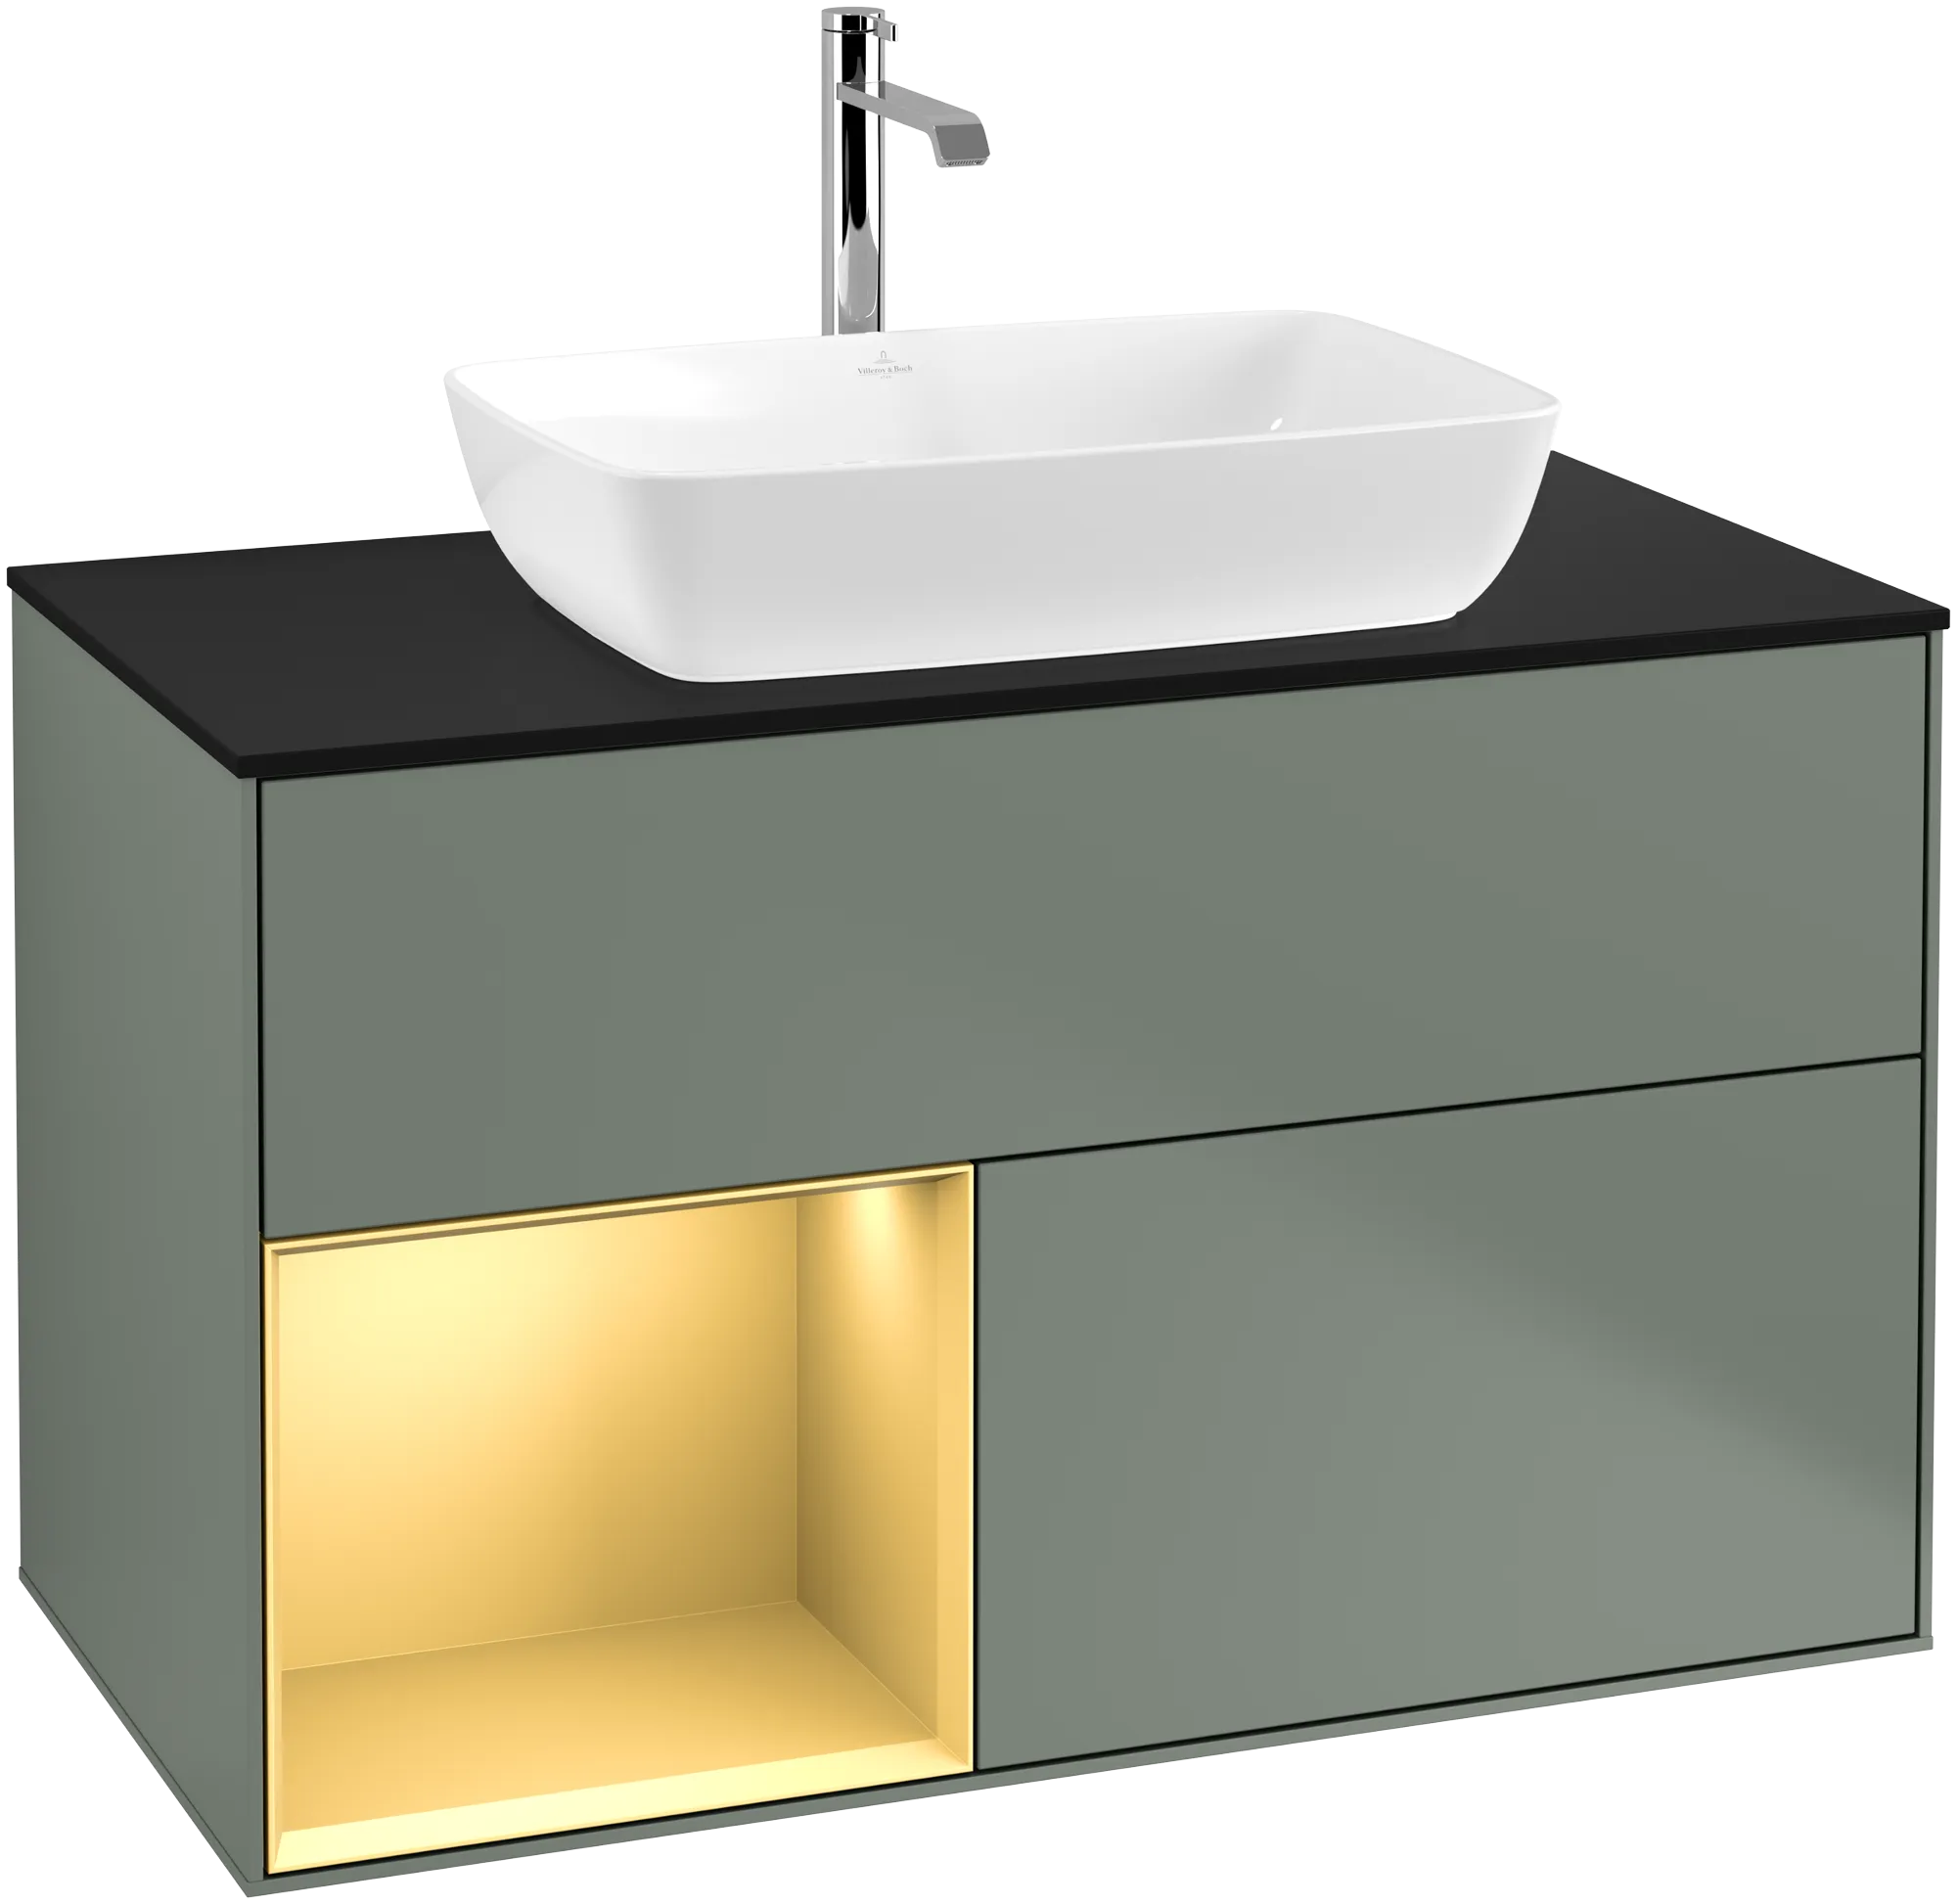 Picture of VILLEROY BOCH Finion Vanity unit, with lighting, 2 pull-out compartments, 1000 x 603 x 501 mm, Olive Matt Lacquer / Gold Matt Lacquer / Glass Black Matt #G772HFGM